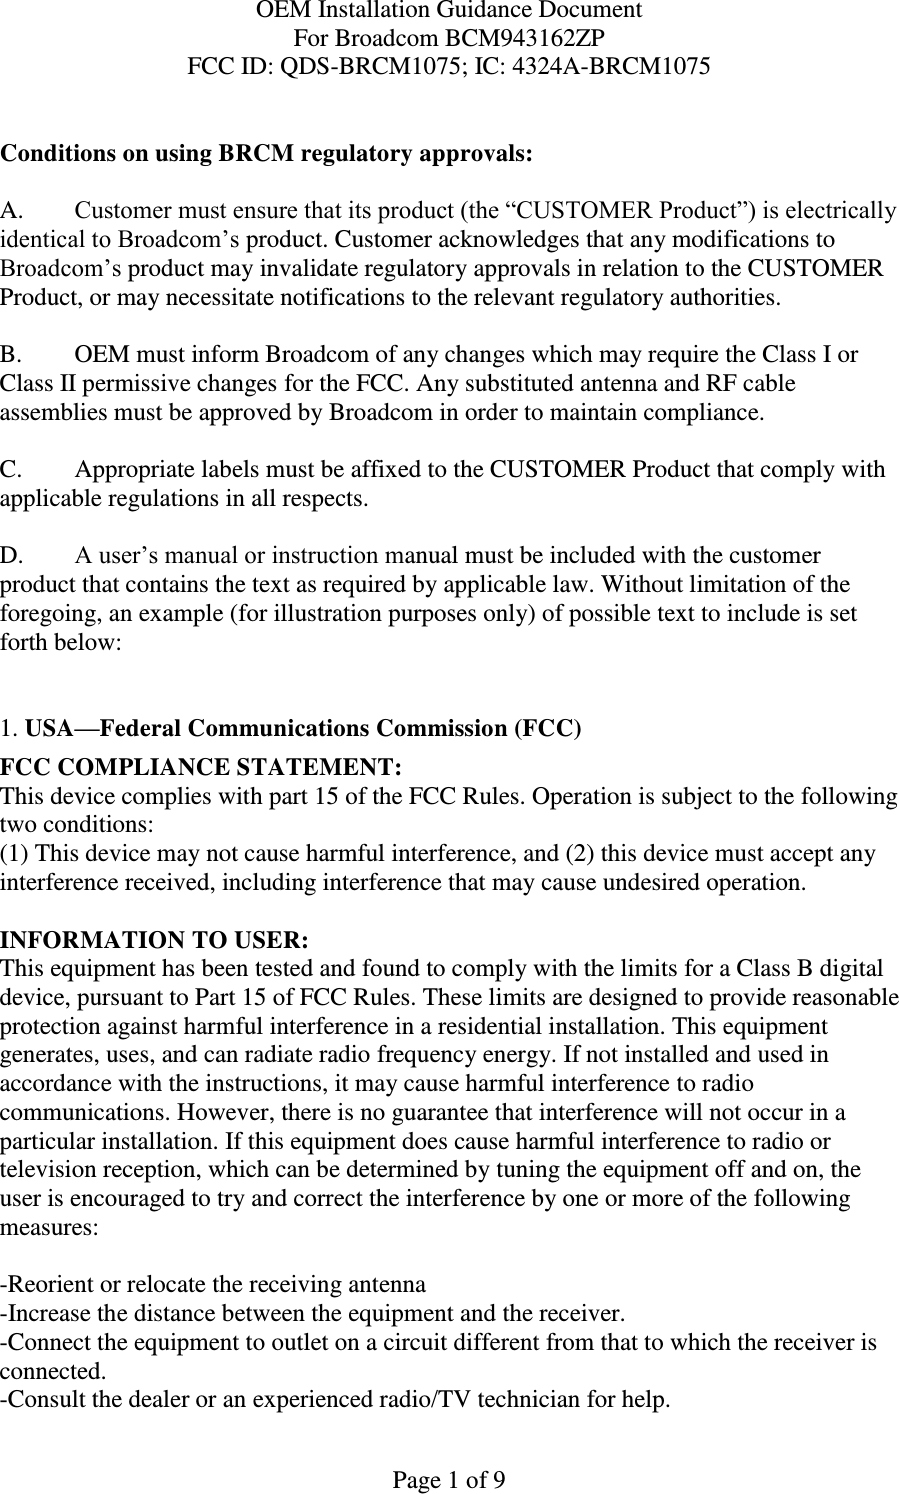 OEM Installation Guidance Document For Broadcom BCM943162ZP FCC ID: QDS-BRCM1075; IC: 4324A-BRCM1075  Page 1 of 9  Conditions on using BRCM regulatory approvals:   A. Customer must ensure that its product (the “CUSTOMER Product”) is electrically identical to Broadcom’s product. Customer acknowledges that any modifications to Broadcom’s product may invalidate regulatory approvals in relation to the CUSTOMER Product, or may necessitate notifications to the relevant regulatory authorities.   B.   OEM must inform Broadcom of any changes which may require the Class I or Class II permissive changes for the FCC. Any substituted antenna and RF cable assemblies must be approved by Broadcom in order to maintain compliance.  C.  Appropriate labels must be affixed to the CUSTOMER Product that comply with  applicable regulations in all respects.    D.   A user’s manual or instruction manual must be included with the customer product that contains the text as required by applicable law. Without limitation of the foregoing, an example (for illustration purposes only) of possible text to include is set forth below:    1. USA—Federal Communications Commission (FCC) FCC COMPLIANCE STATEMENT: This device complies with part 15 of the FCC Rules. Operation is subject to the following two conditions: (1) This device may not cause harmful interference, and (2) this device must accept any interference received, including interference that may cause undesired operation.  INFORMATION TO USER: This equipment has been tested and found to comply with the limits for a Class B digital device, pursuant to Part 15 of FCC Rules. These limits are designed to provide reasonable protection against harmful interference in a residential installation. This equipment generates, uses, and can radiate radio frequency energy. If not installed and used in accordance with the instructions, it may cause harmful interference to radio communications. However, there is no guarantee that interference will not occur in a particular installation. If this equipment does cause harmful interference to radio or television reception, which can be determined by tuning the equipment off and on, the user is encouraged to try and correct the interference by one or more of the following measures:    -Reorient or relocate the receiving antenna -Increase the distance between the equipment and the receiver. -Connect the equipment to outlet on a circuit different from that to which the receiver is connected. -Consult the dealer or an experienced radio/TV technician for help. 